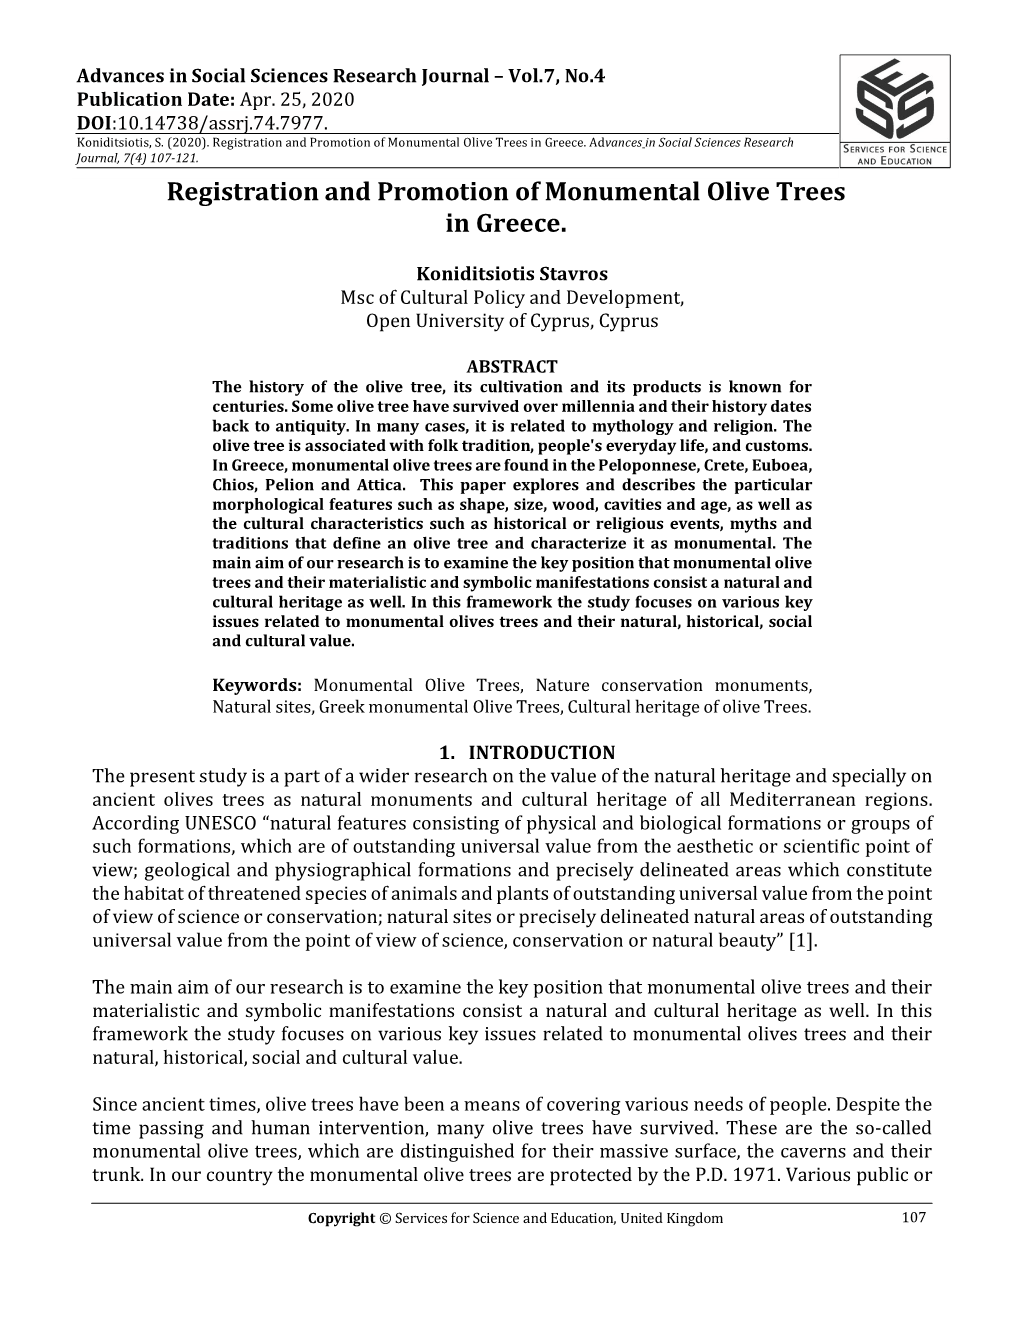 Registration and Promotion of Monumental Olive Trees in Greece. Advances in Social Sciences Research Journal, 7(4) 107-121